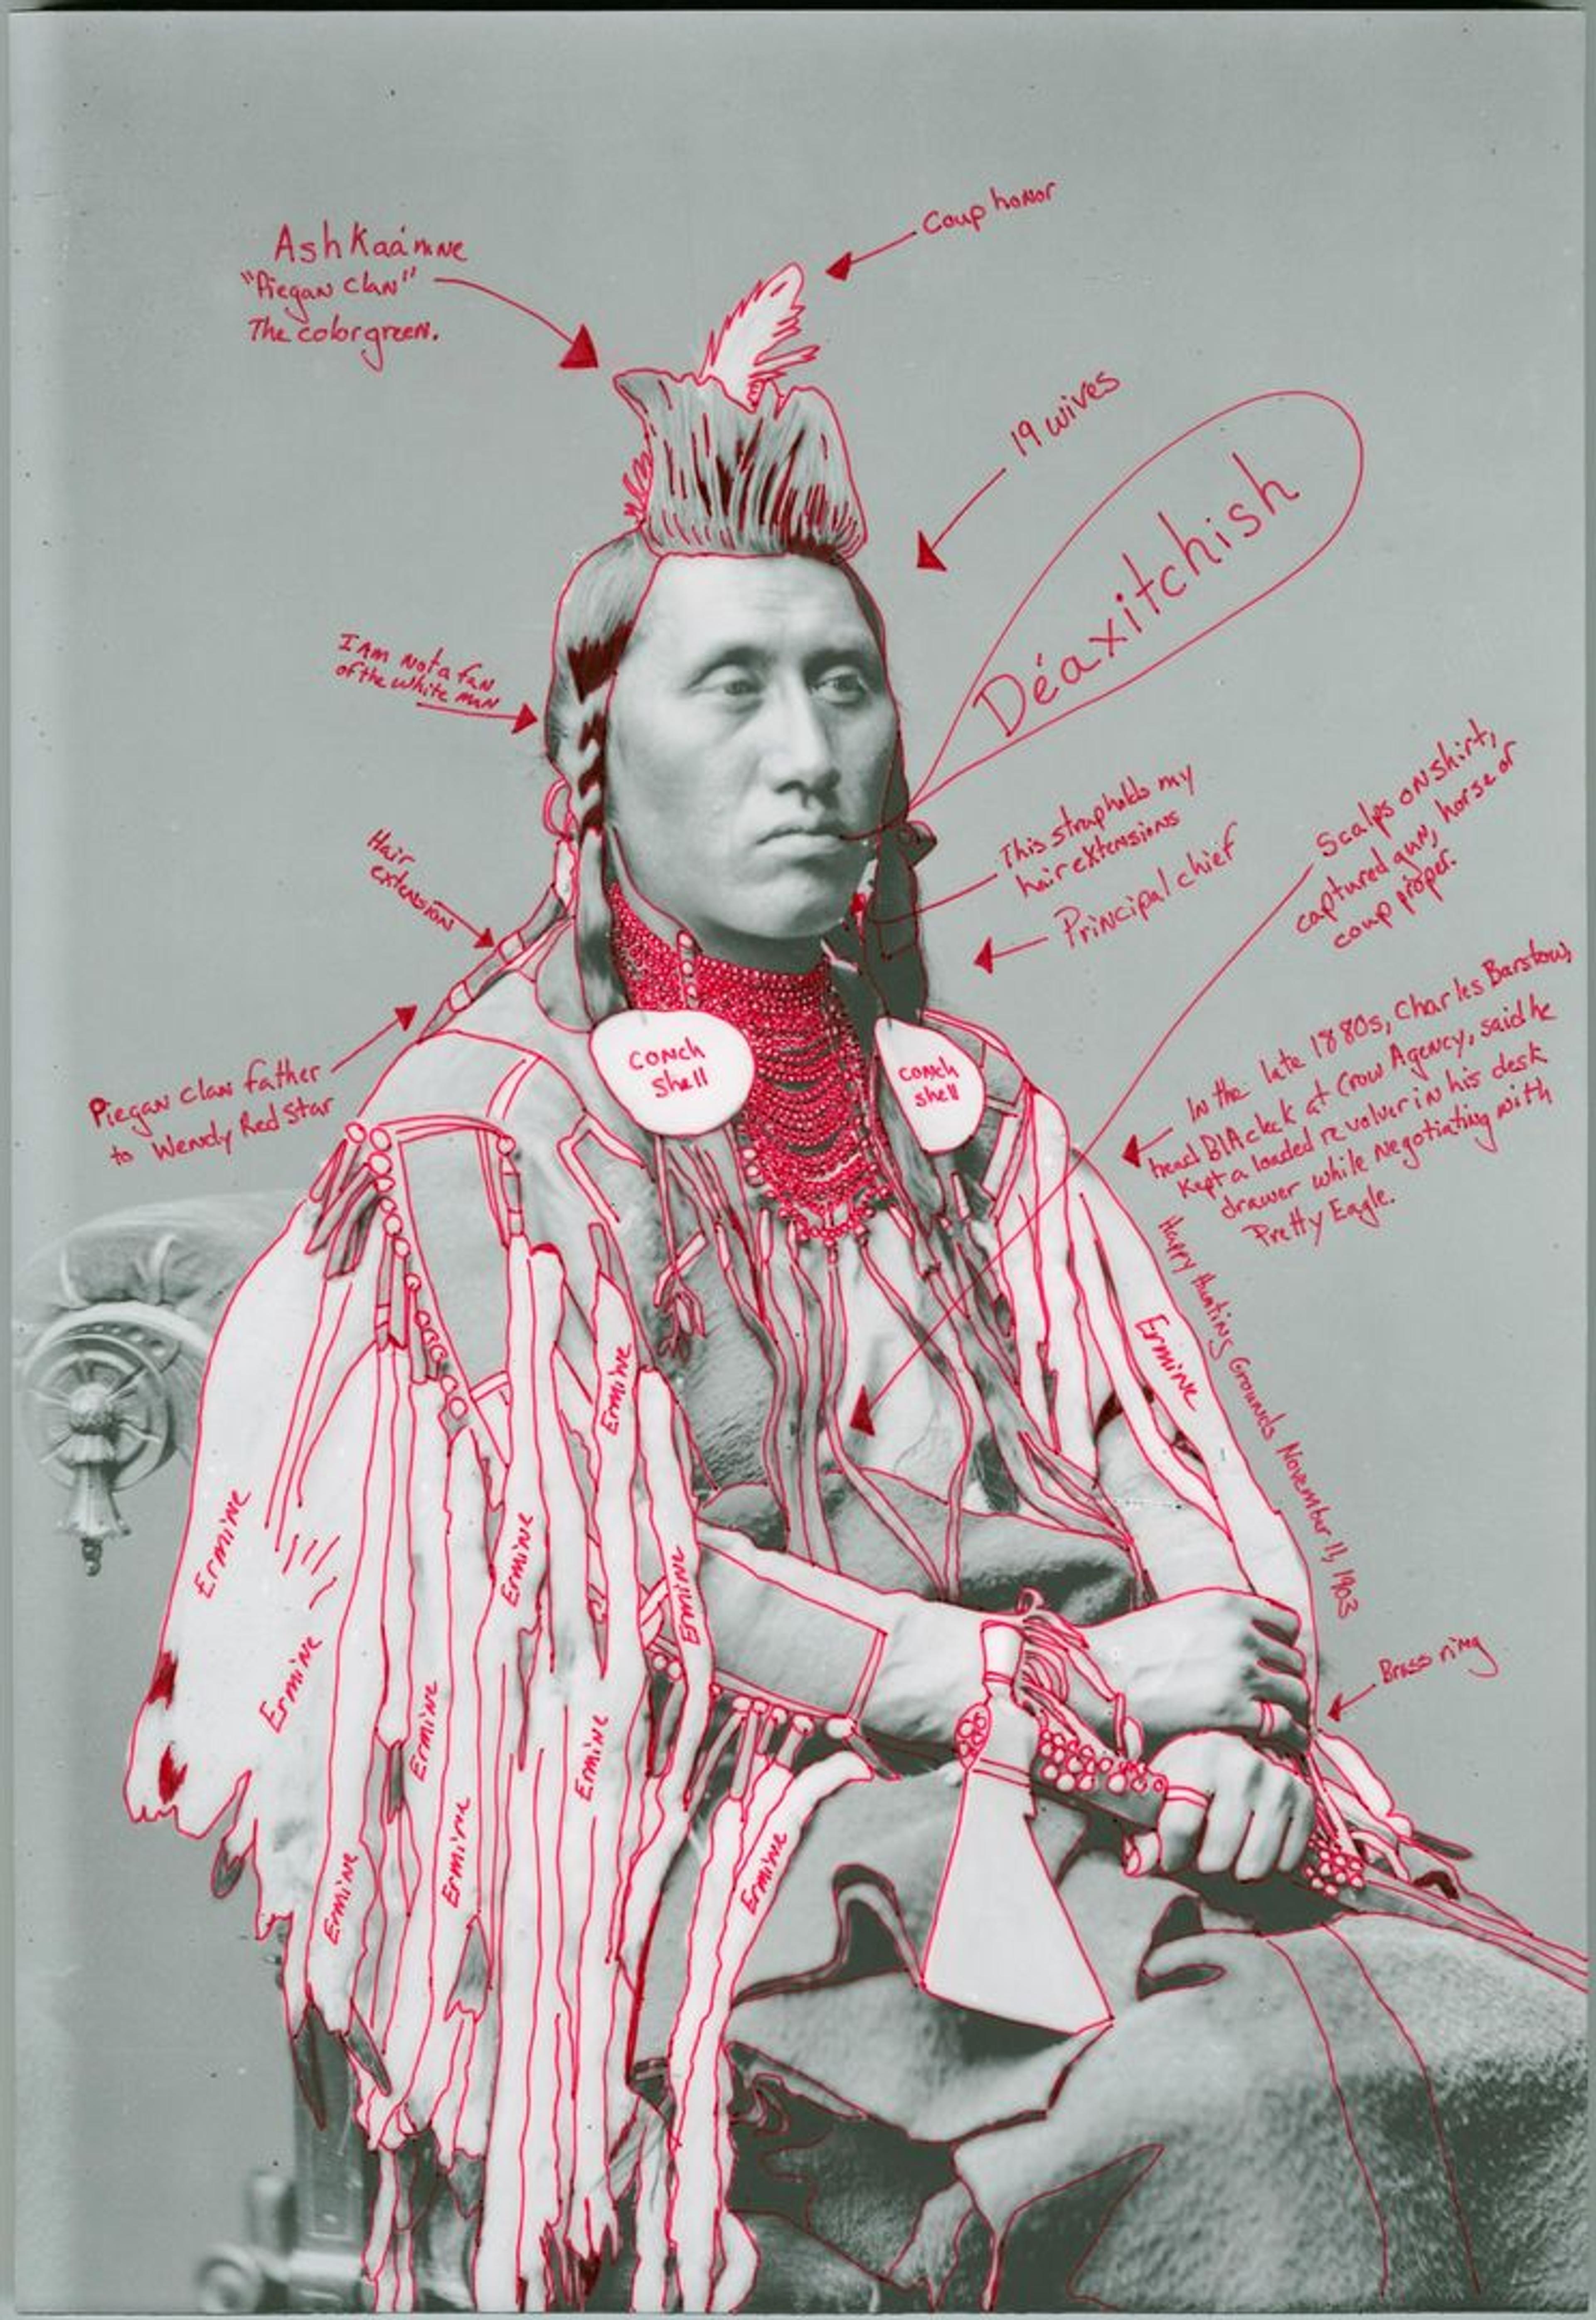 Picture of Wendy Red Star's artwork, which is a historic portrait of Chief Déaxitchish sitting in his regalia. She has made notes on the image in bright red ink